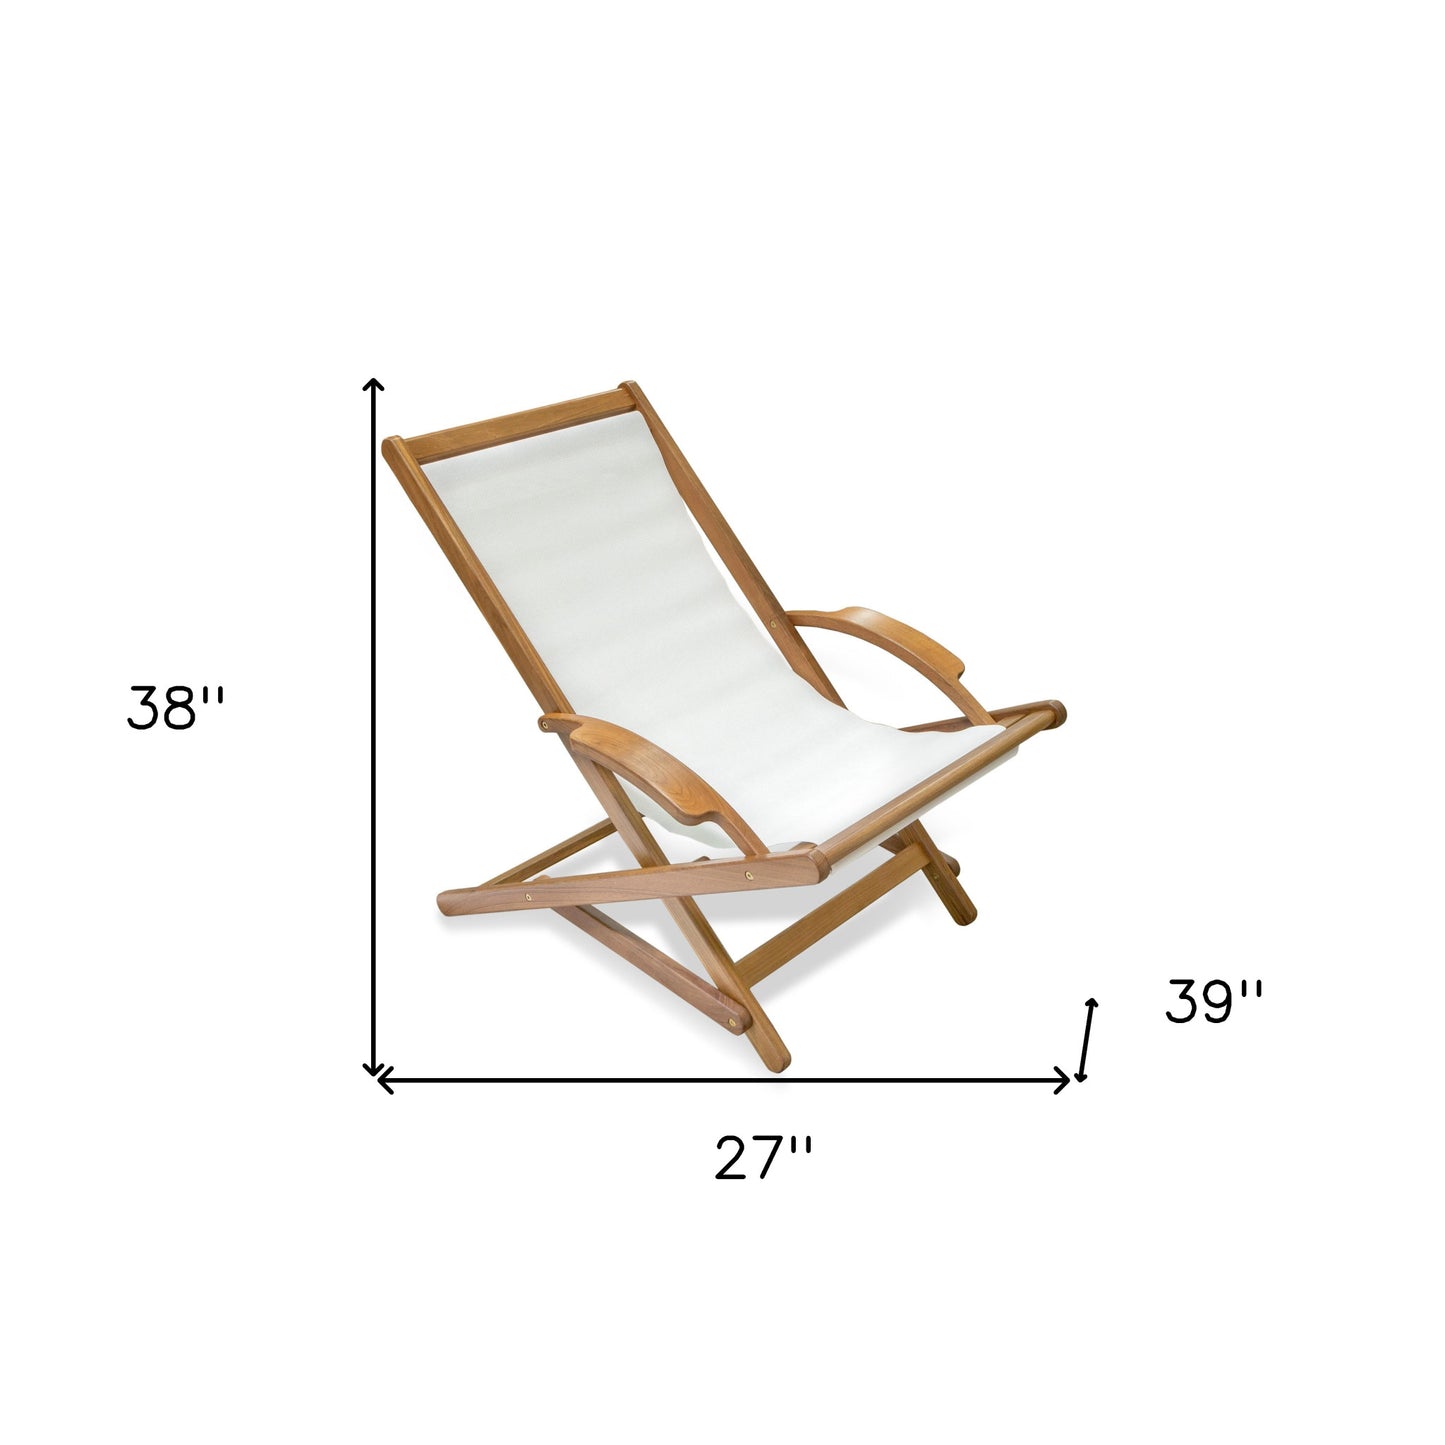 27" White and Natural Wood Solid Wood Indoor Outdoor Deck Chair